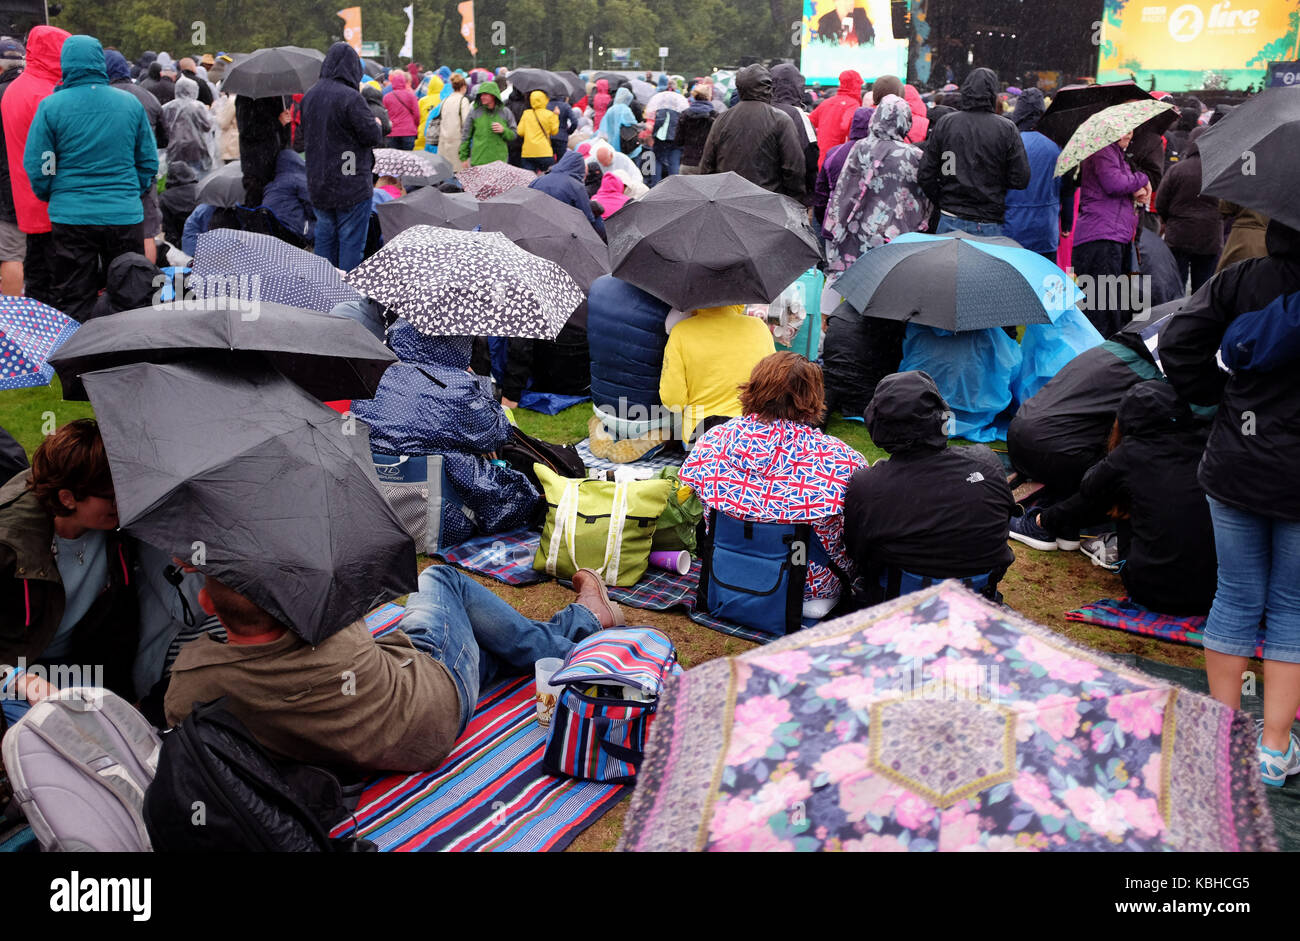 Taking shelter in the rain at Radio 2 Festival in a Day picnic at Hyde Park  London 2017 Stock Photo - Alamy